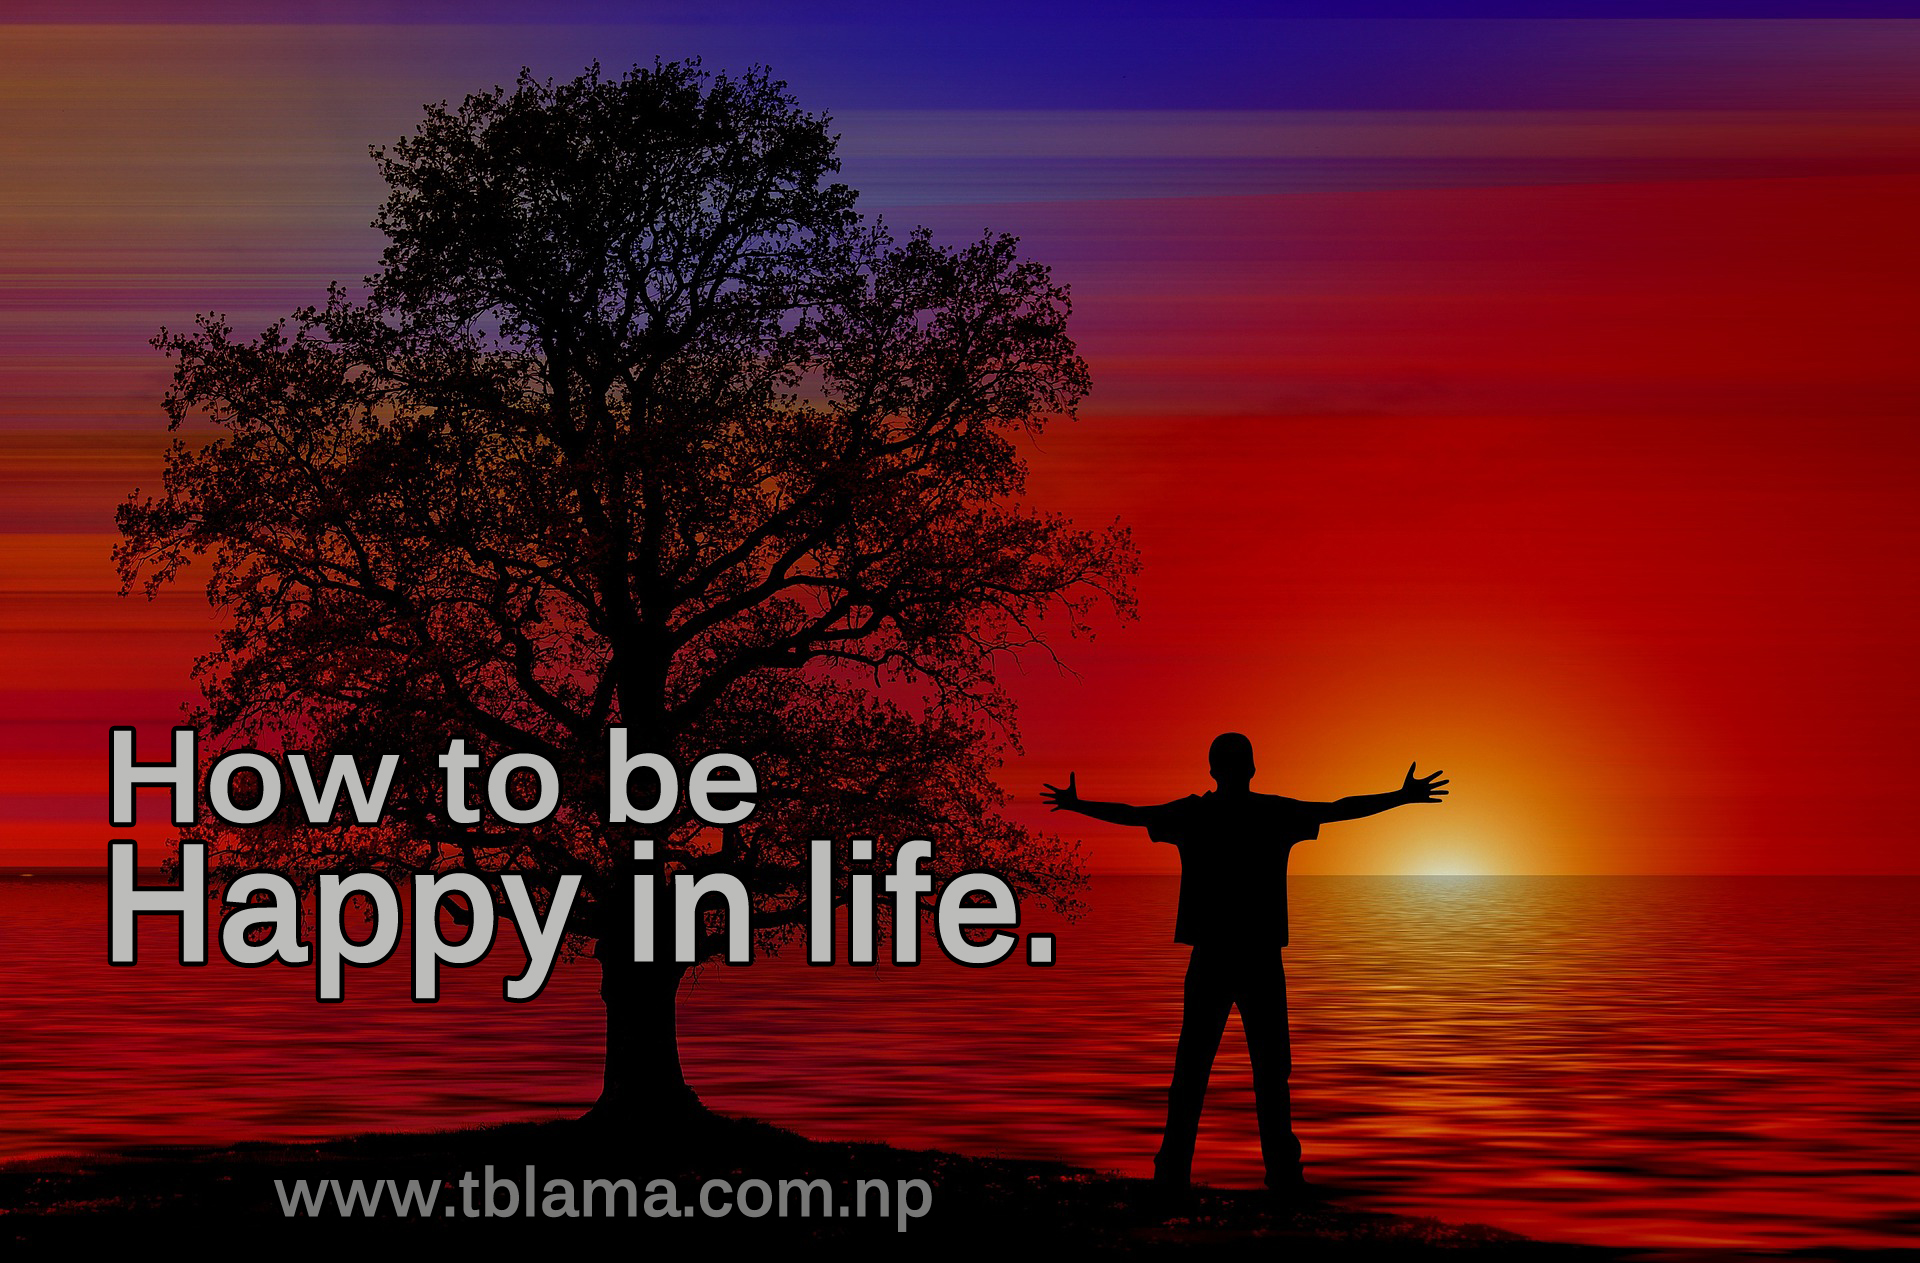 How to be happy in life.